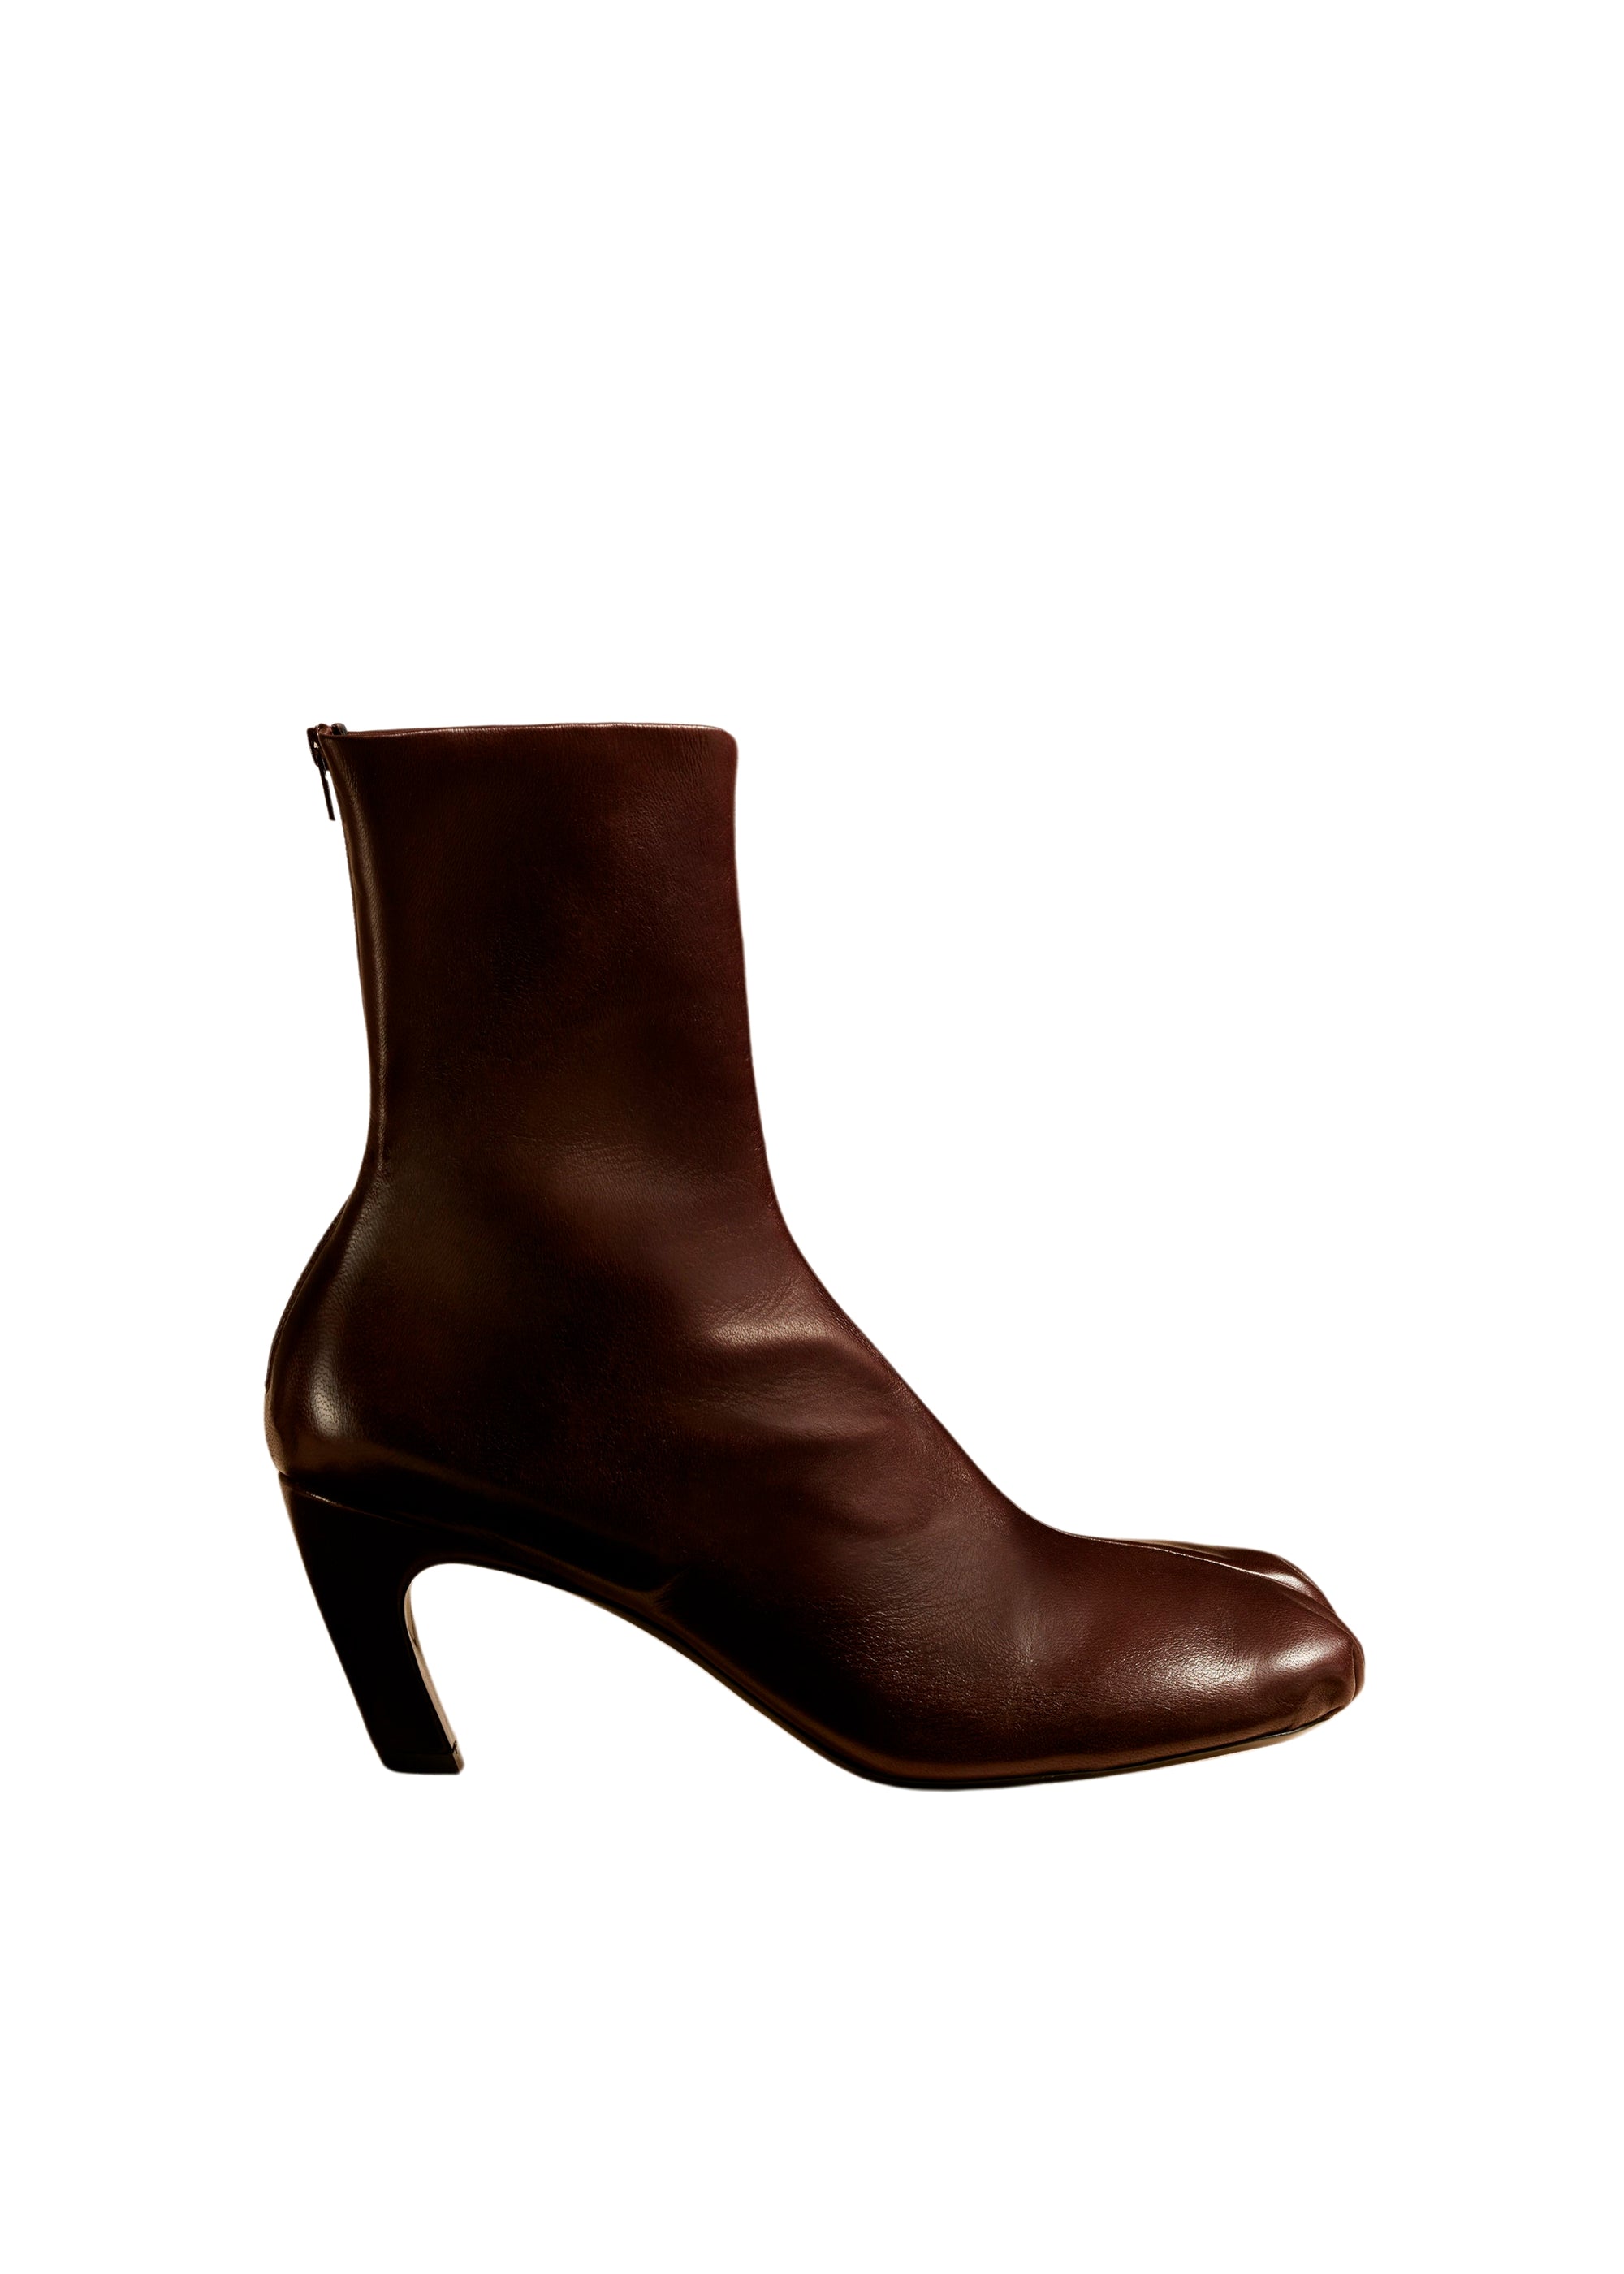 Normandy boot in leather - Bordeaux